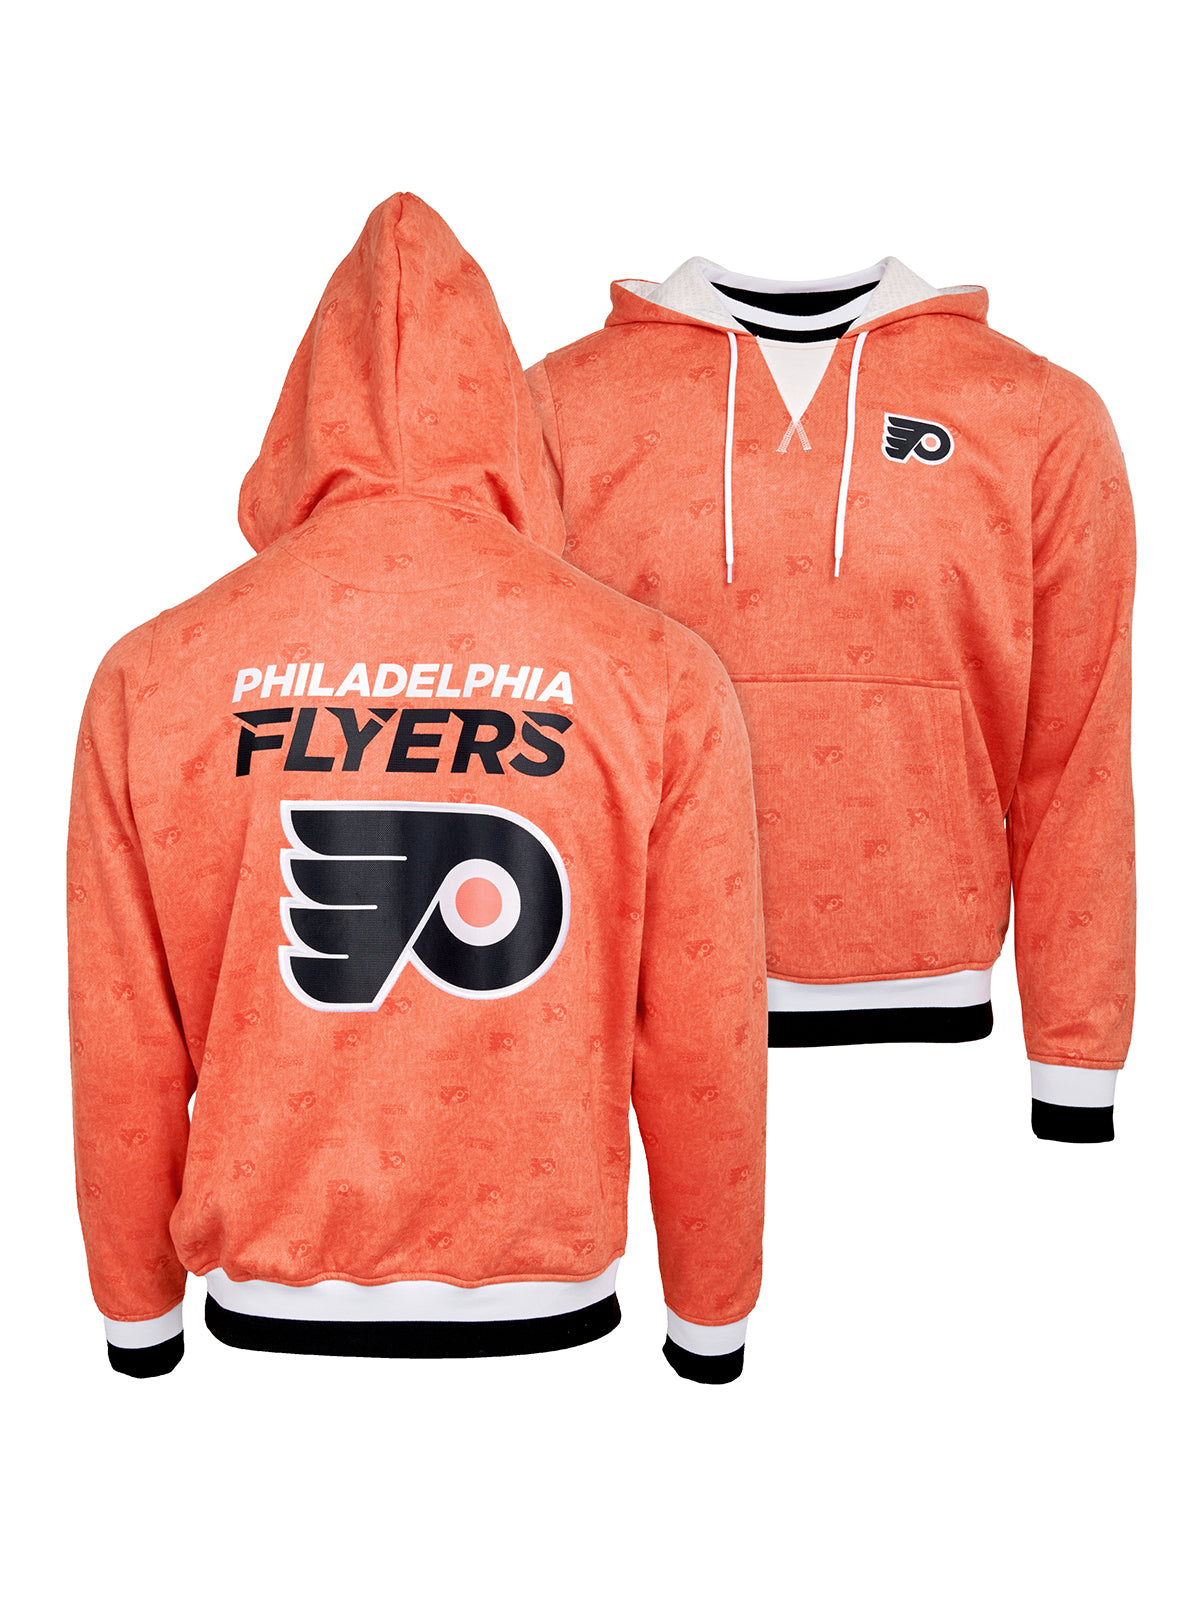 Philadelphia Flyers Hoodie - Show your team spirit, with the iconic team logo patch on the front and back, and proudly display your Philadelphia Flyers support in their team colors with this NHL hockey hoodie.